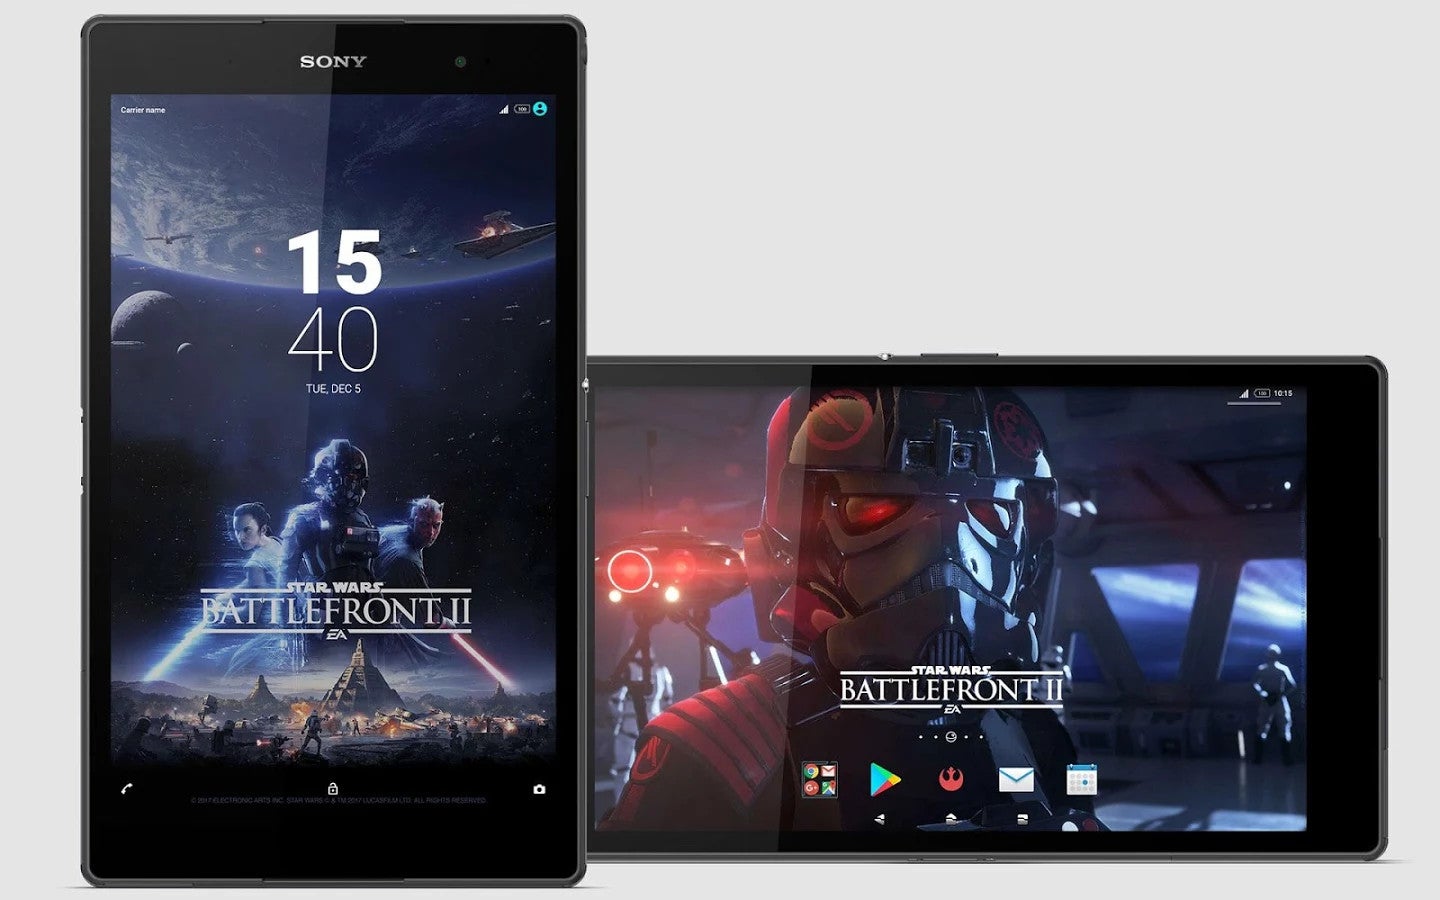 Sony launches Star Wars Battlefront II Xperia Theme in the Google Play Store